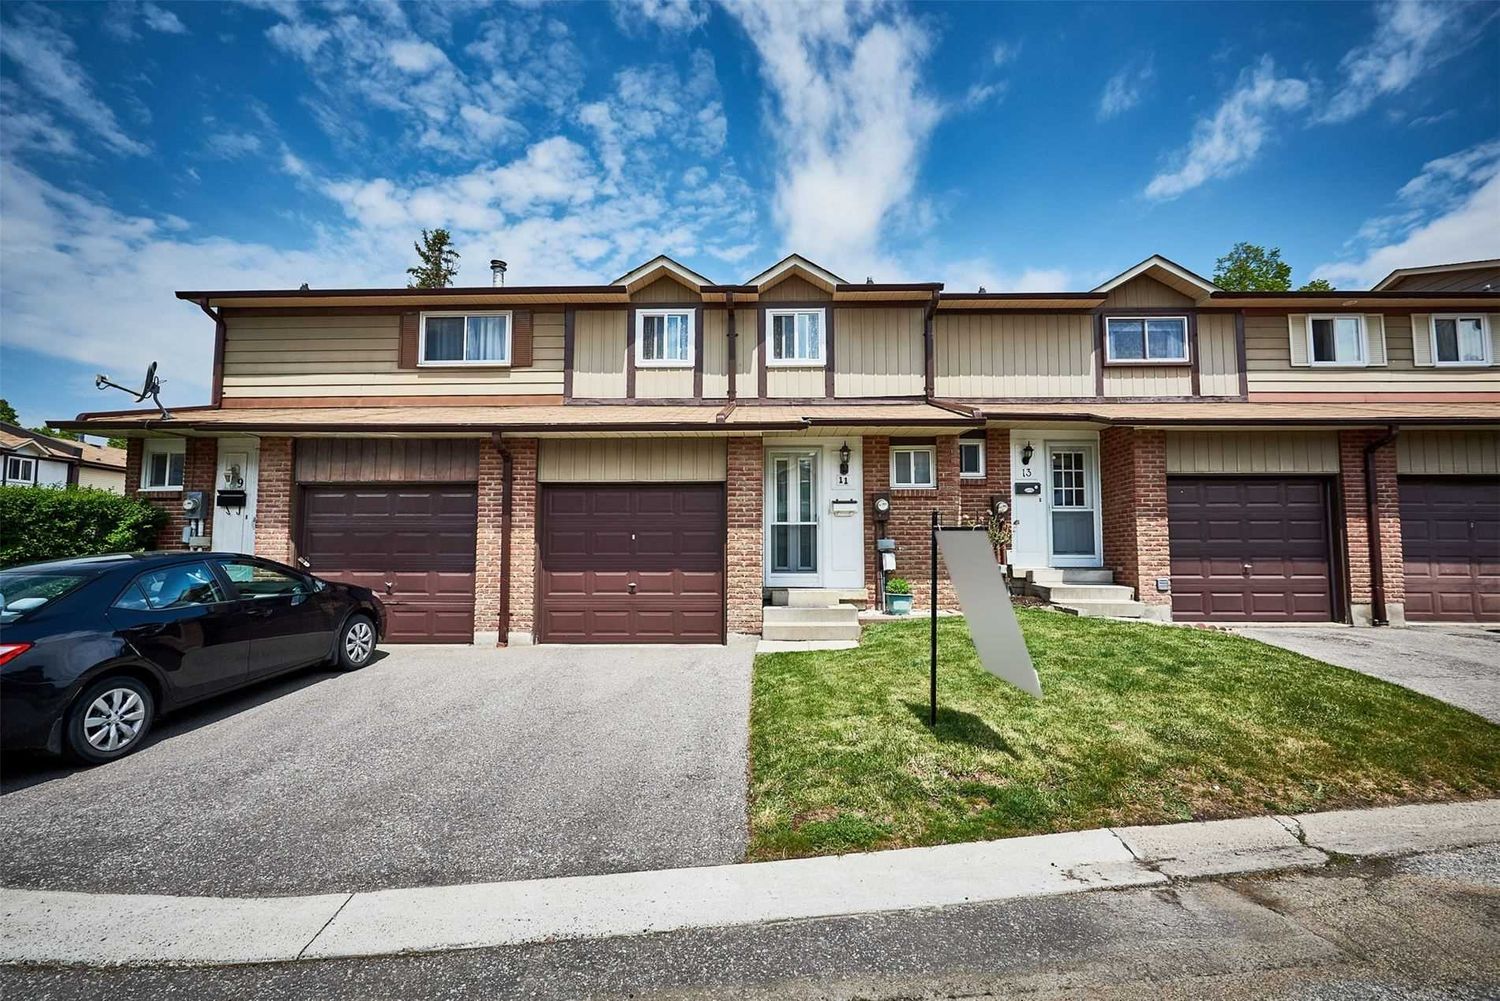 1-100 Parker Crescent. Parker Crescent Townhomes is located in  Ajax, Toronto - image #1 of 2